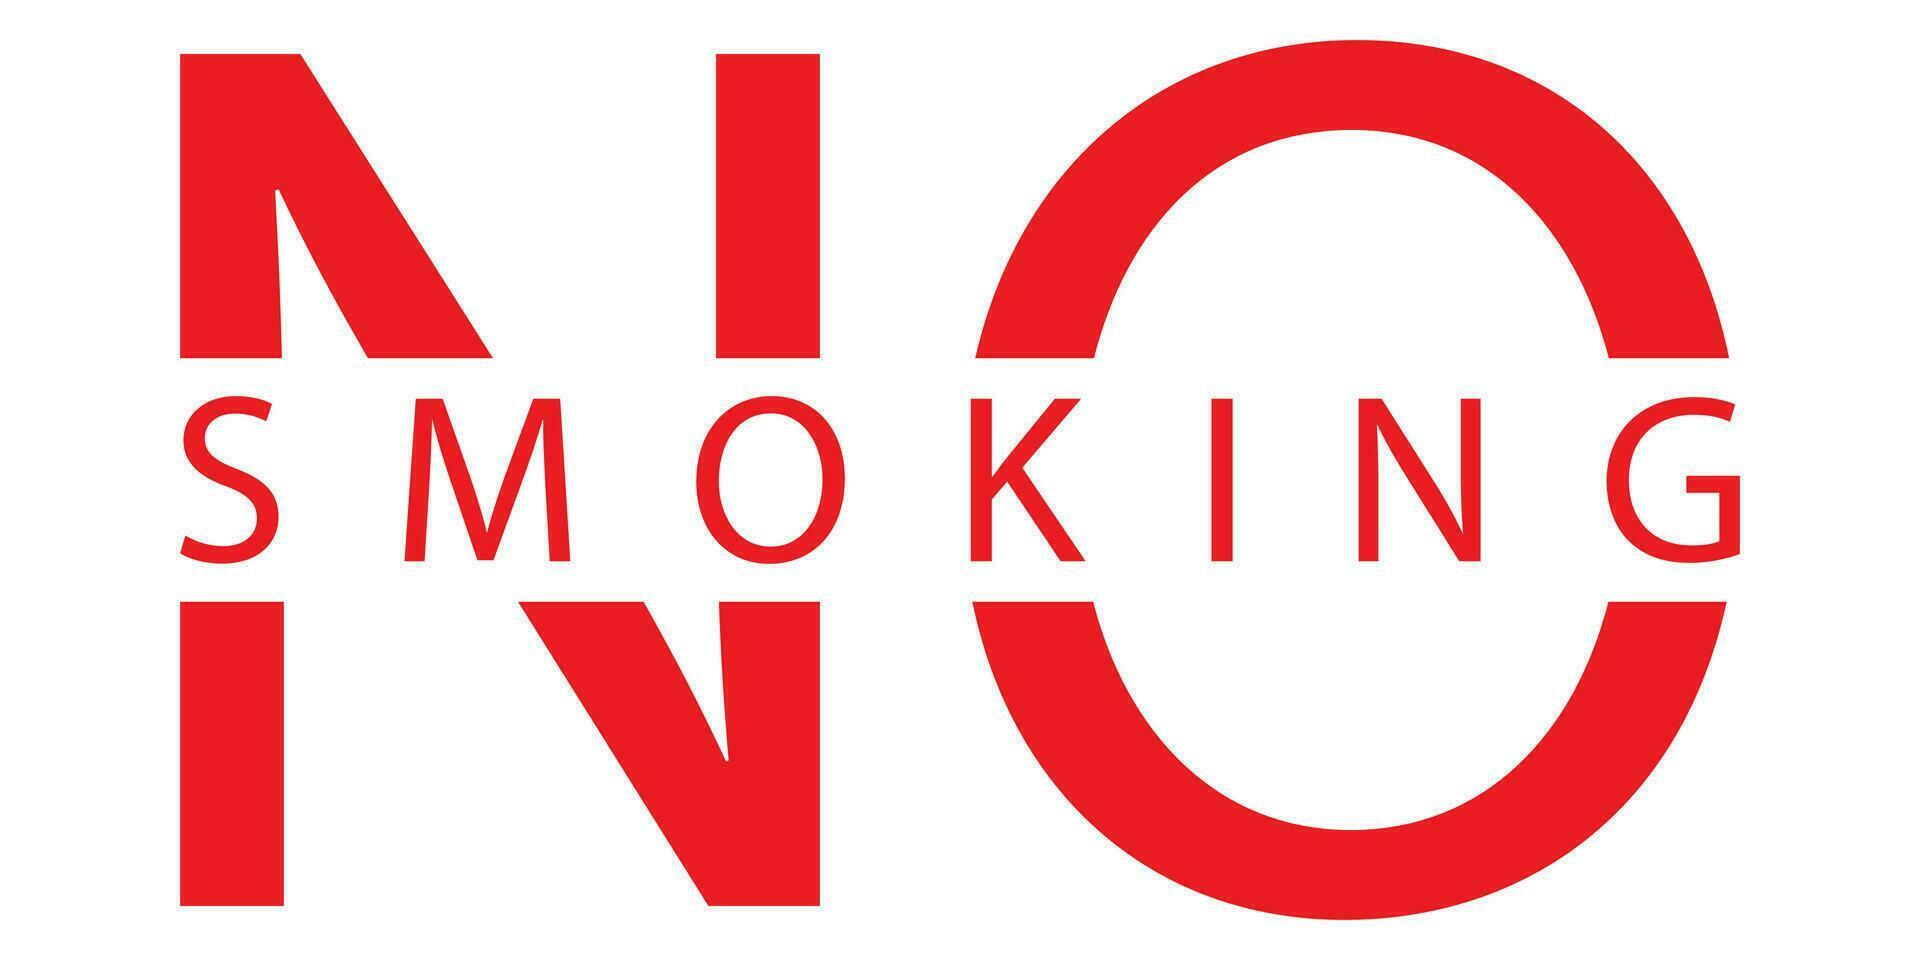 No smoking sign. Forbidden icon. Motivation text to stop using cigarette. Stop warning picogram. Do not smoke in public place. Red text icon. Restriction illustration. Vector EPS 10,